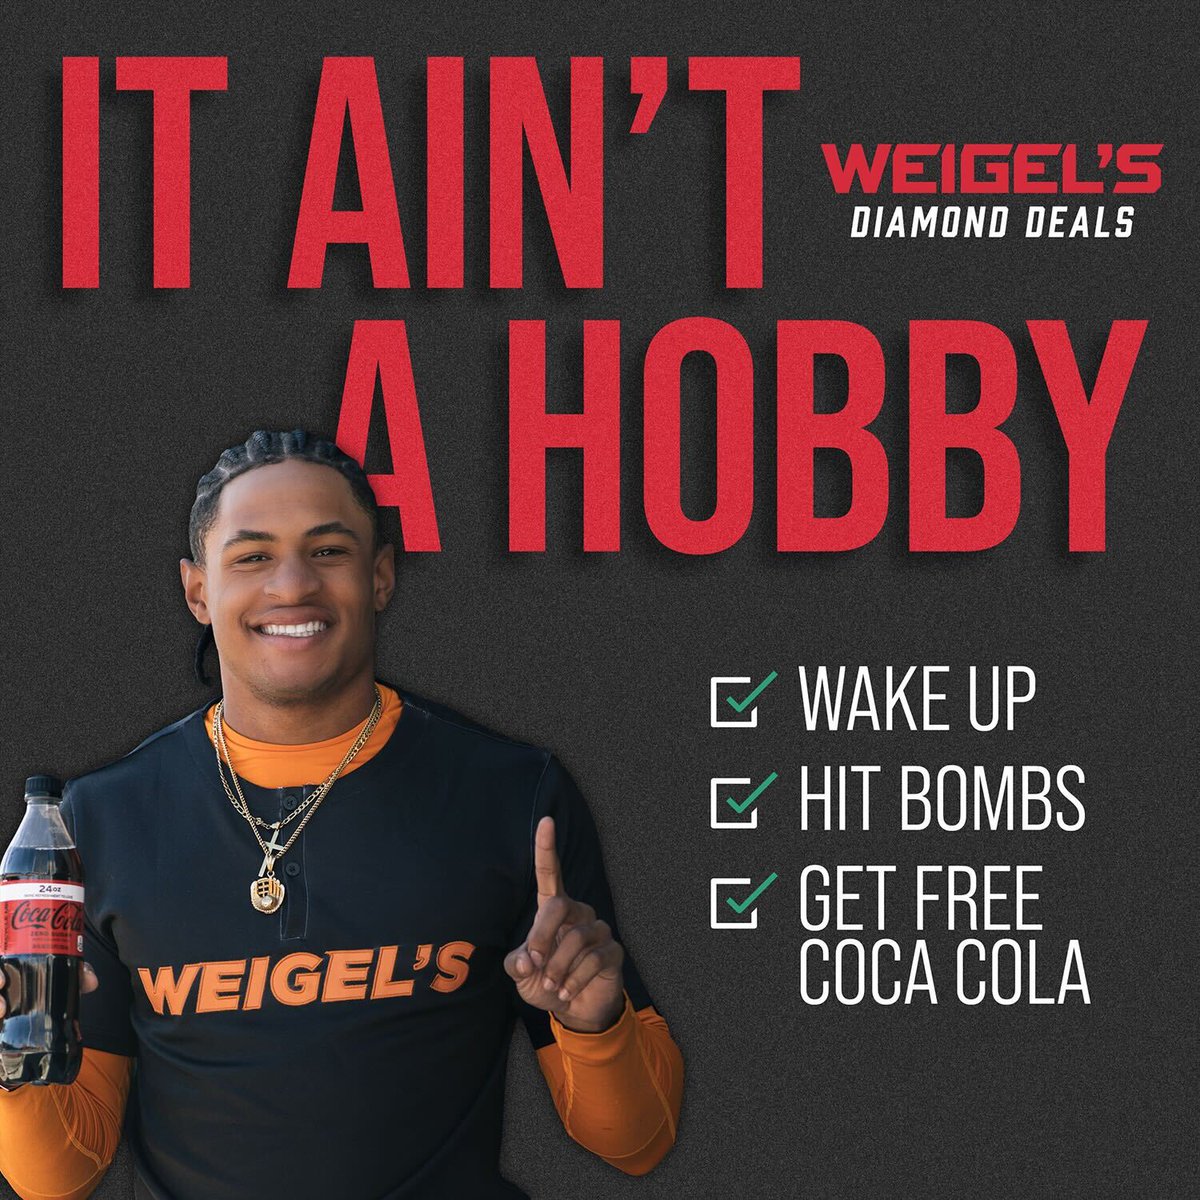 Ladies and gentlemen, he's done it again! Christian Moore has hit another home run! Stop by Weigel's tomorrow to get your free 24 oz coke product with your My Weigel’s Rewards card!